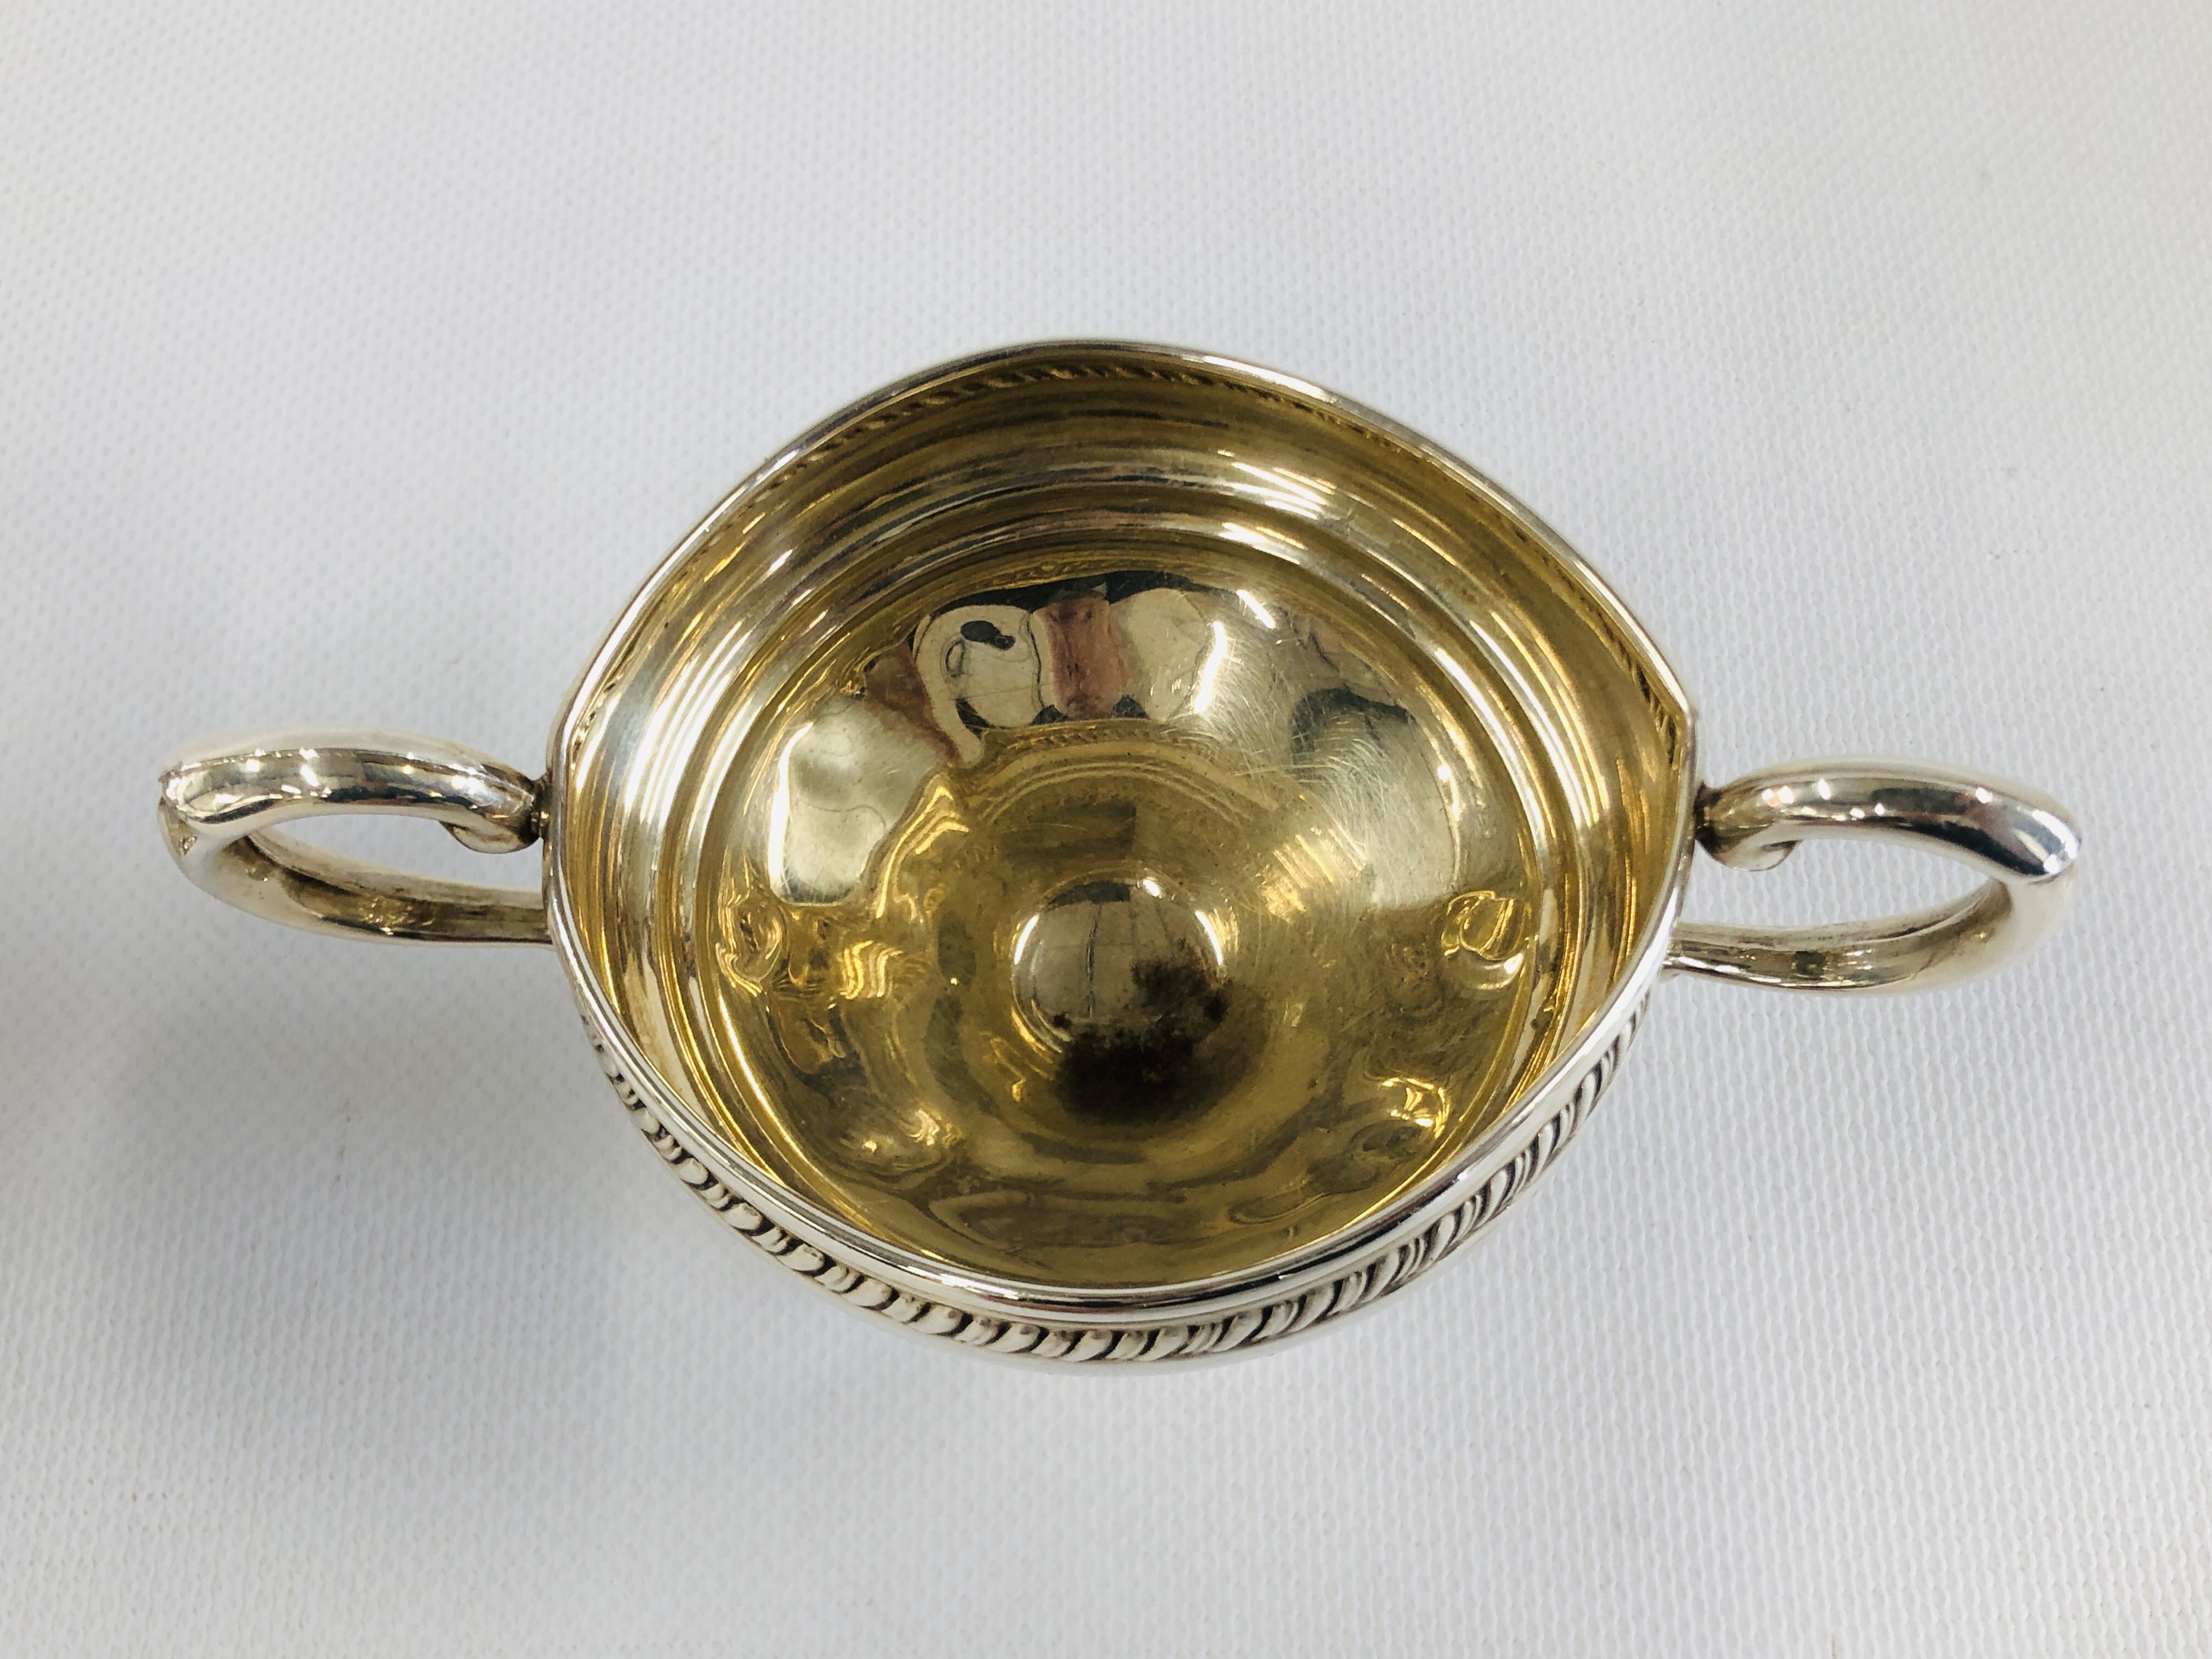 A DECORATIVE CREAM JUG AND MATCHING TWO HANDLED SUGAR BOWL MARKED "CROWN" STERLING. - Image 5 of 13